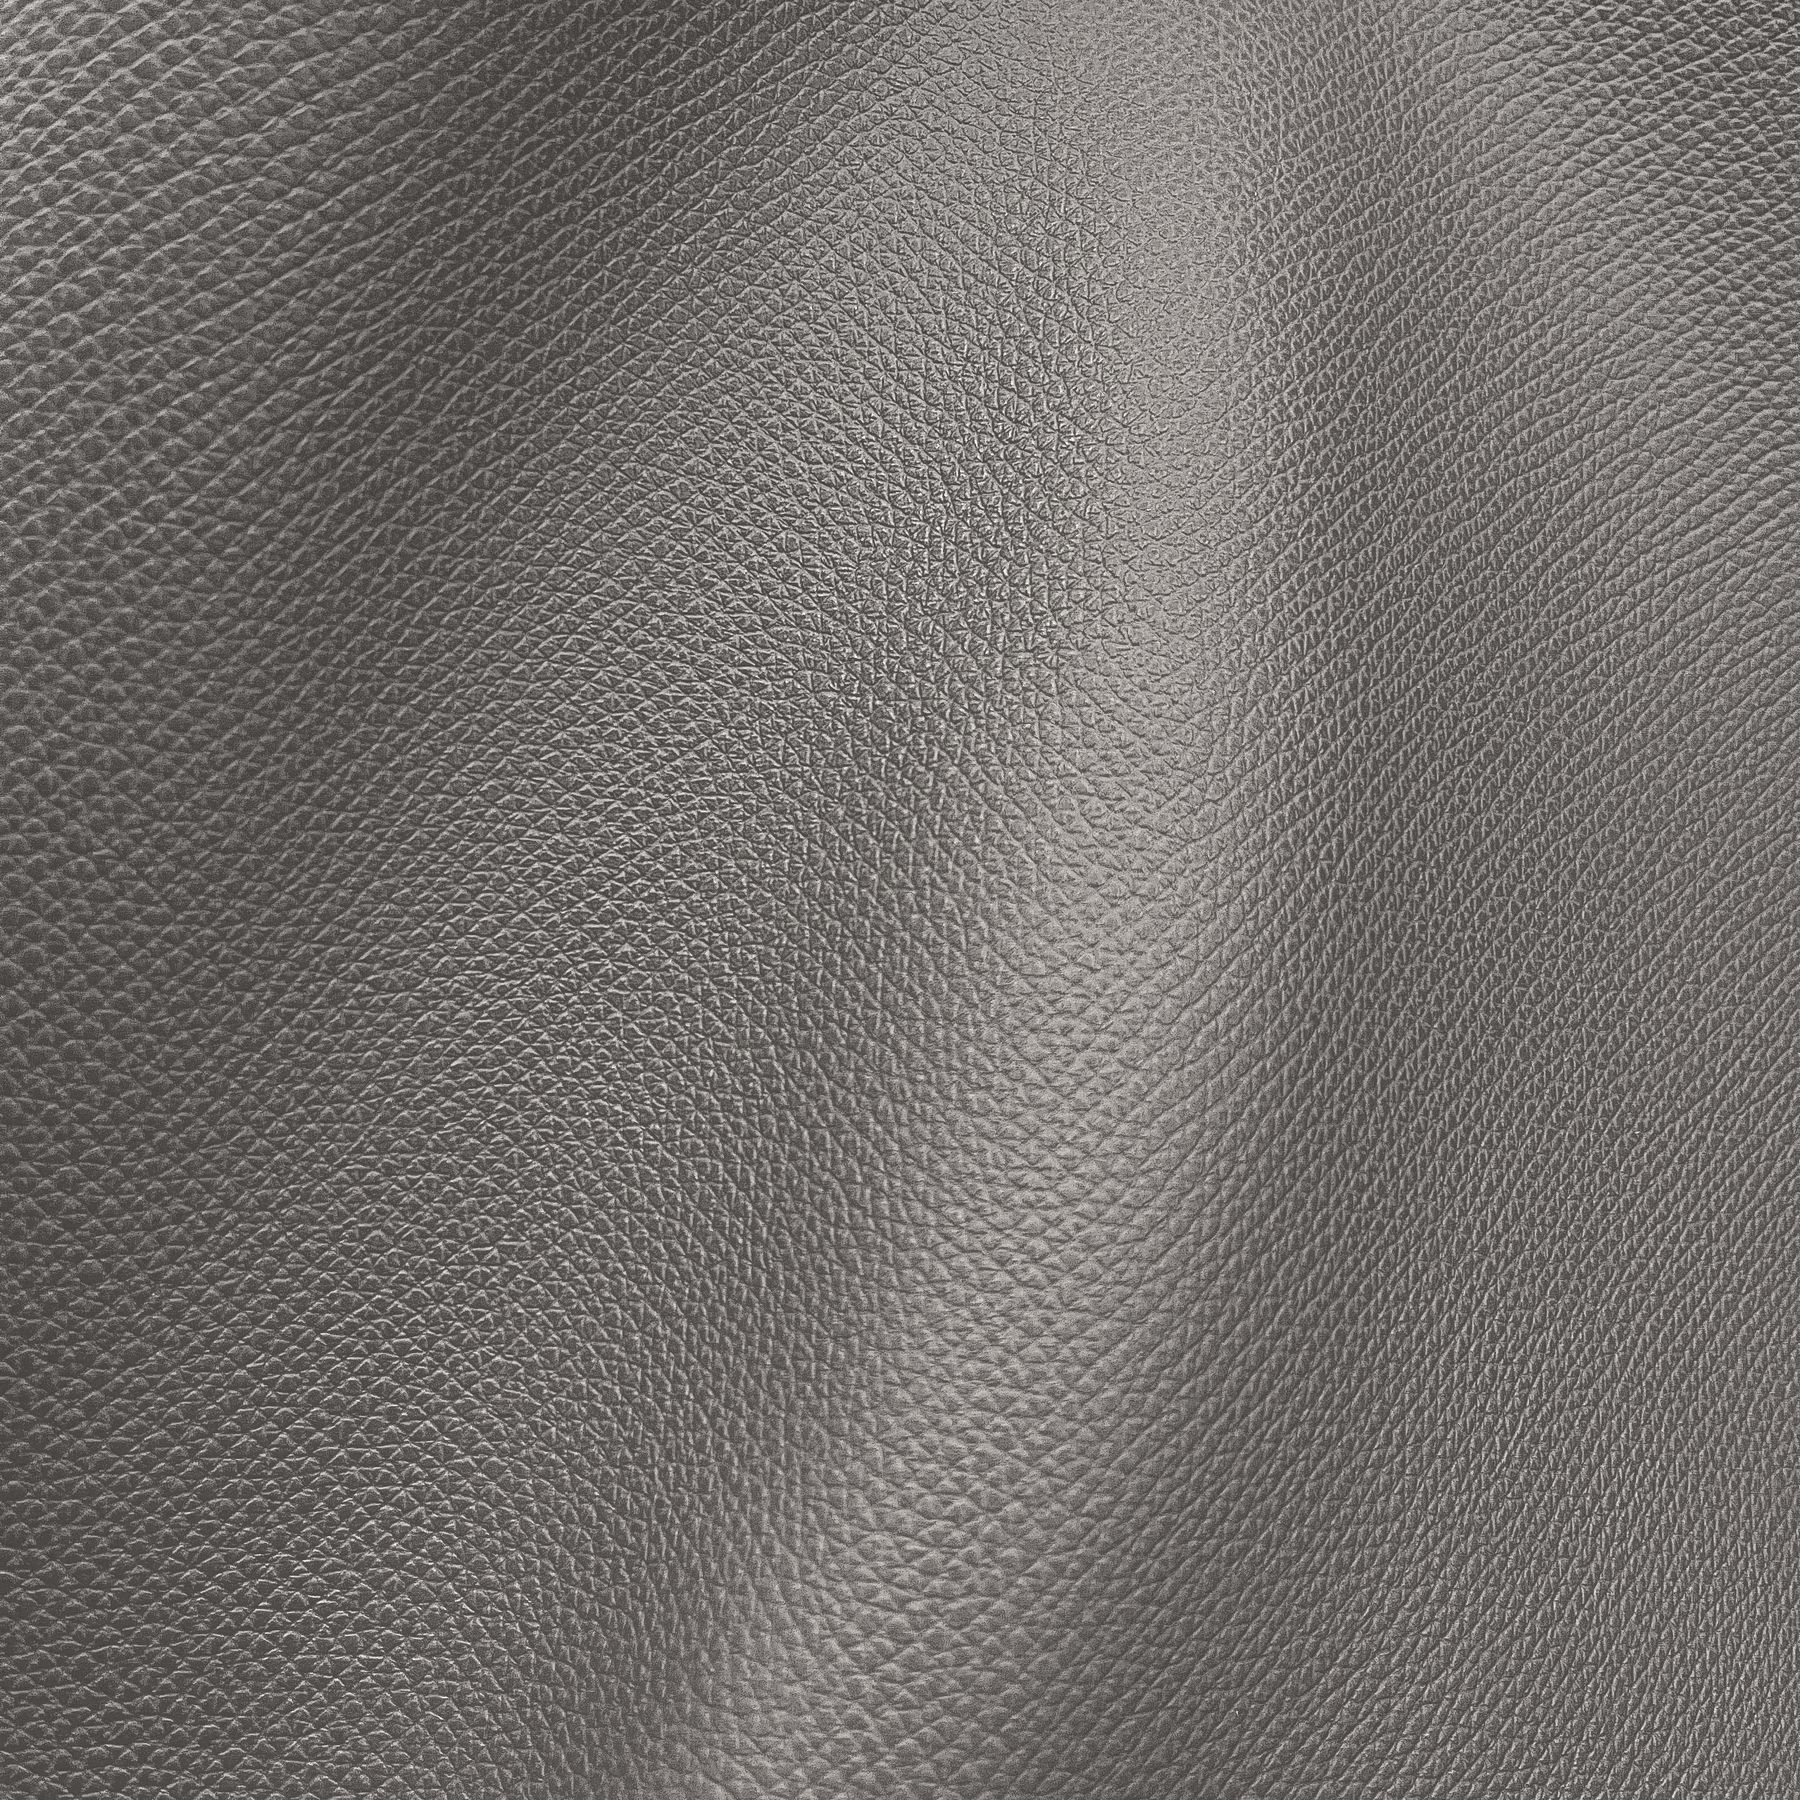 Soft PU Leather Upholstery Fabric 1.2mm Thick Upholstery Leather Distressed  Bark Fabric(Khaki,36x54)